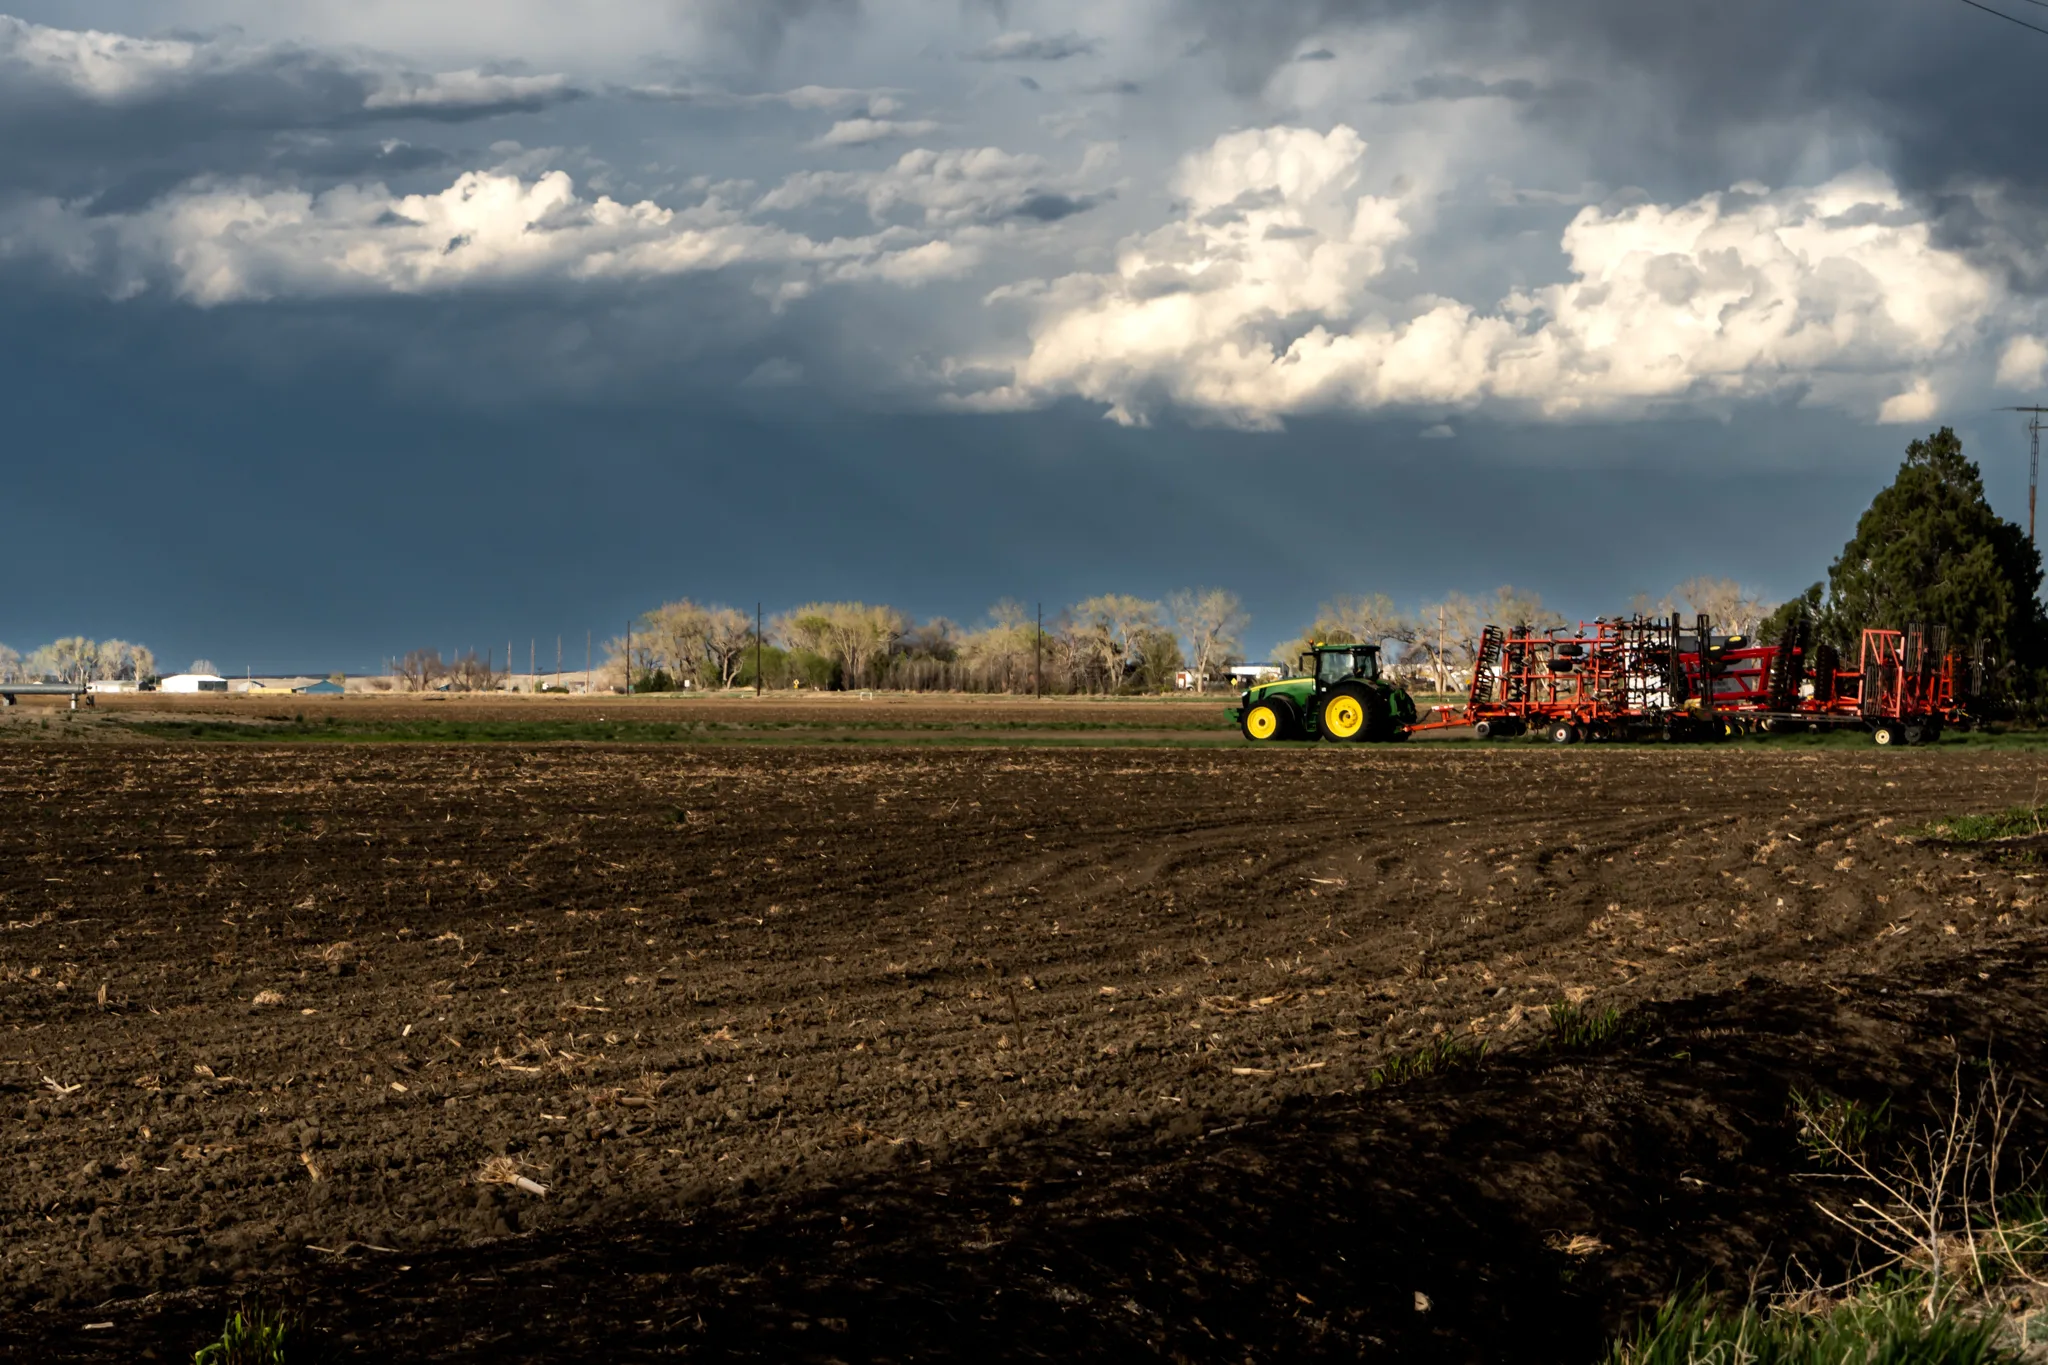 Westward view from eastern Morgan County Colorado of a tractor connected to implements, which are illuminated by a lowering sun against the backdrop of dark storm clouds that had just passed through.